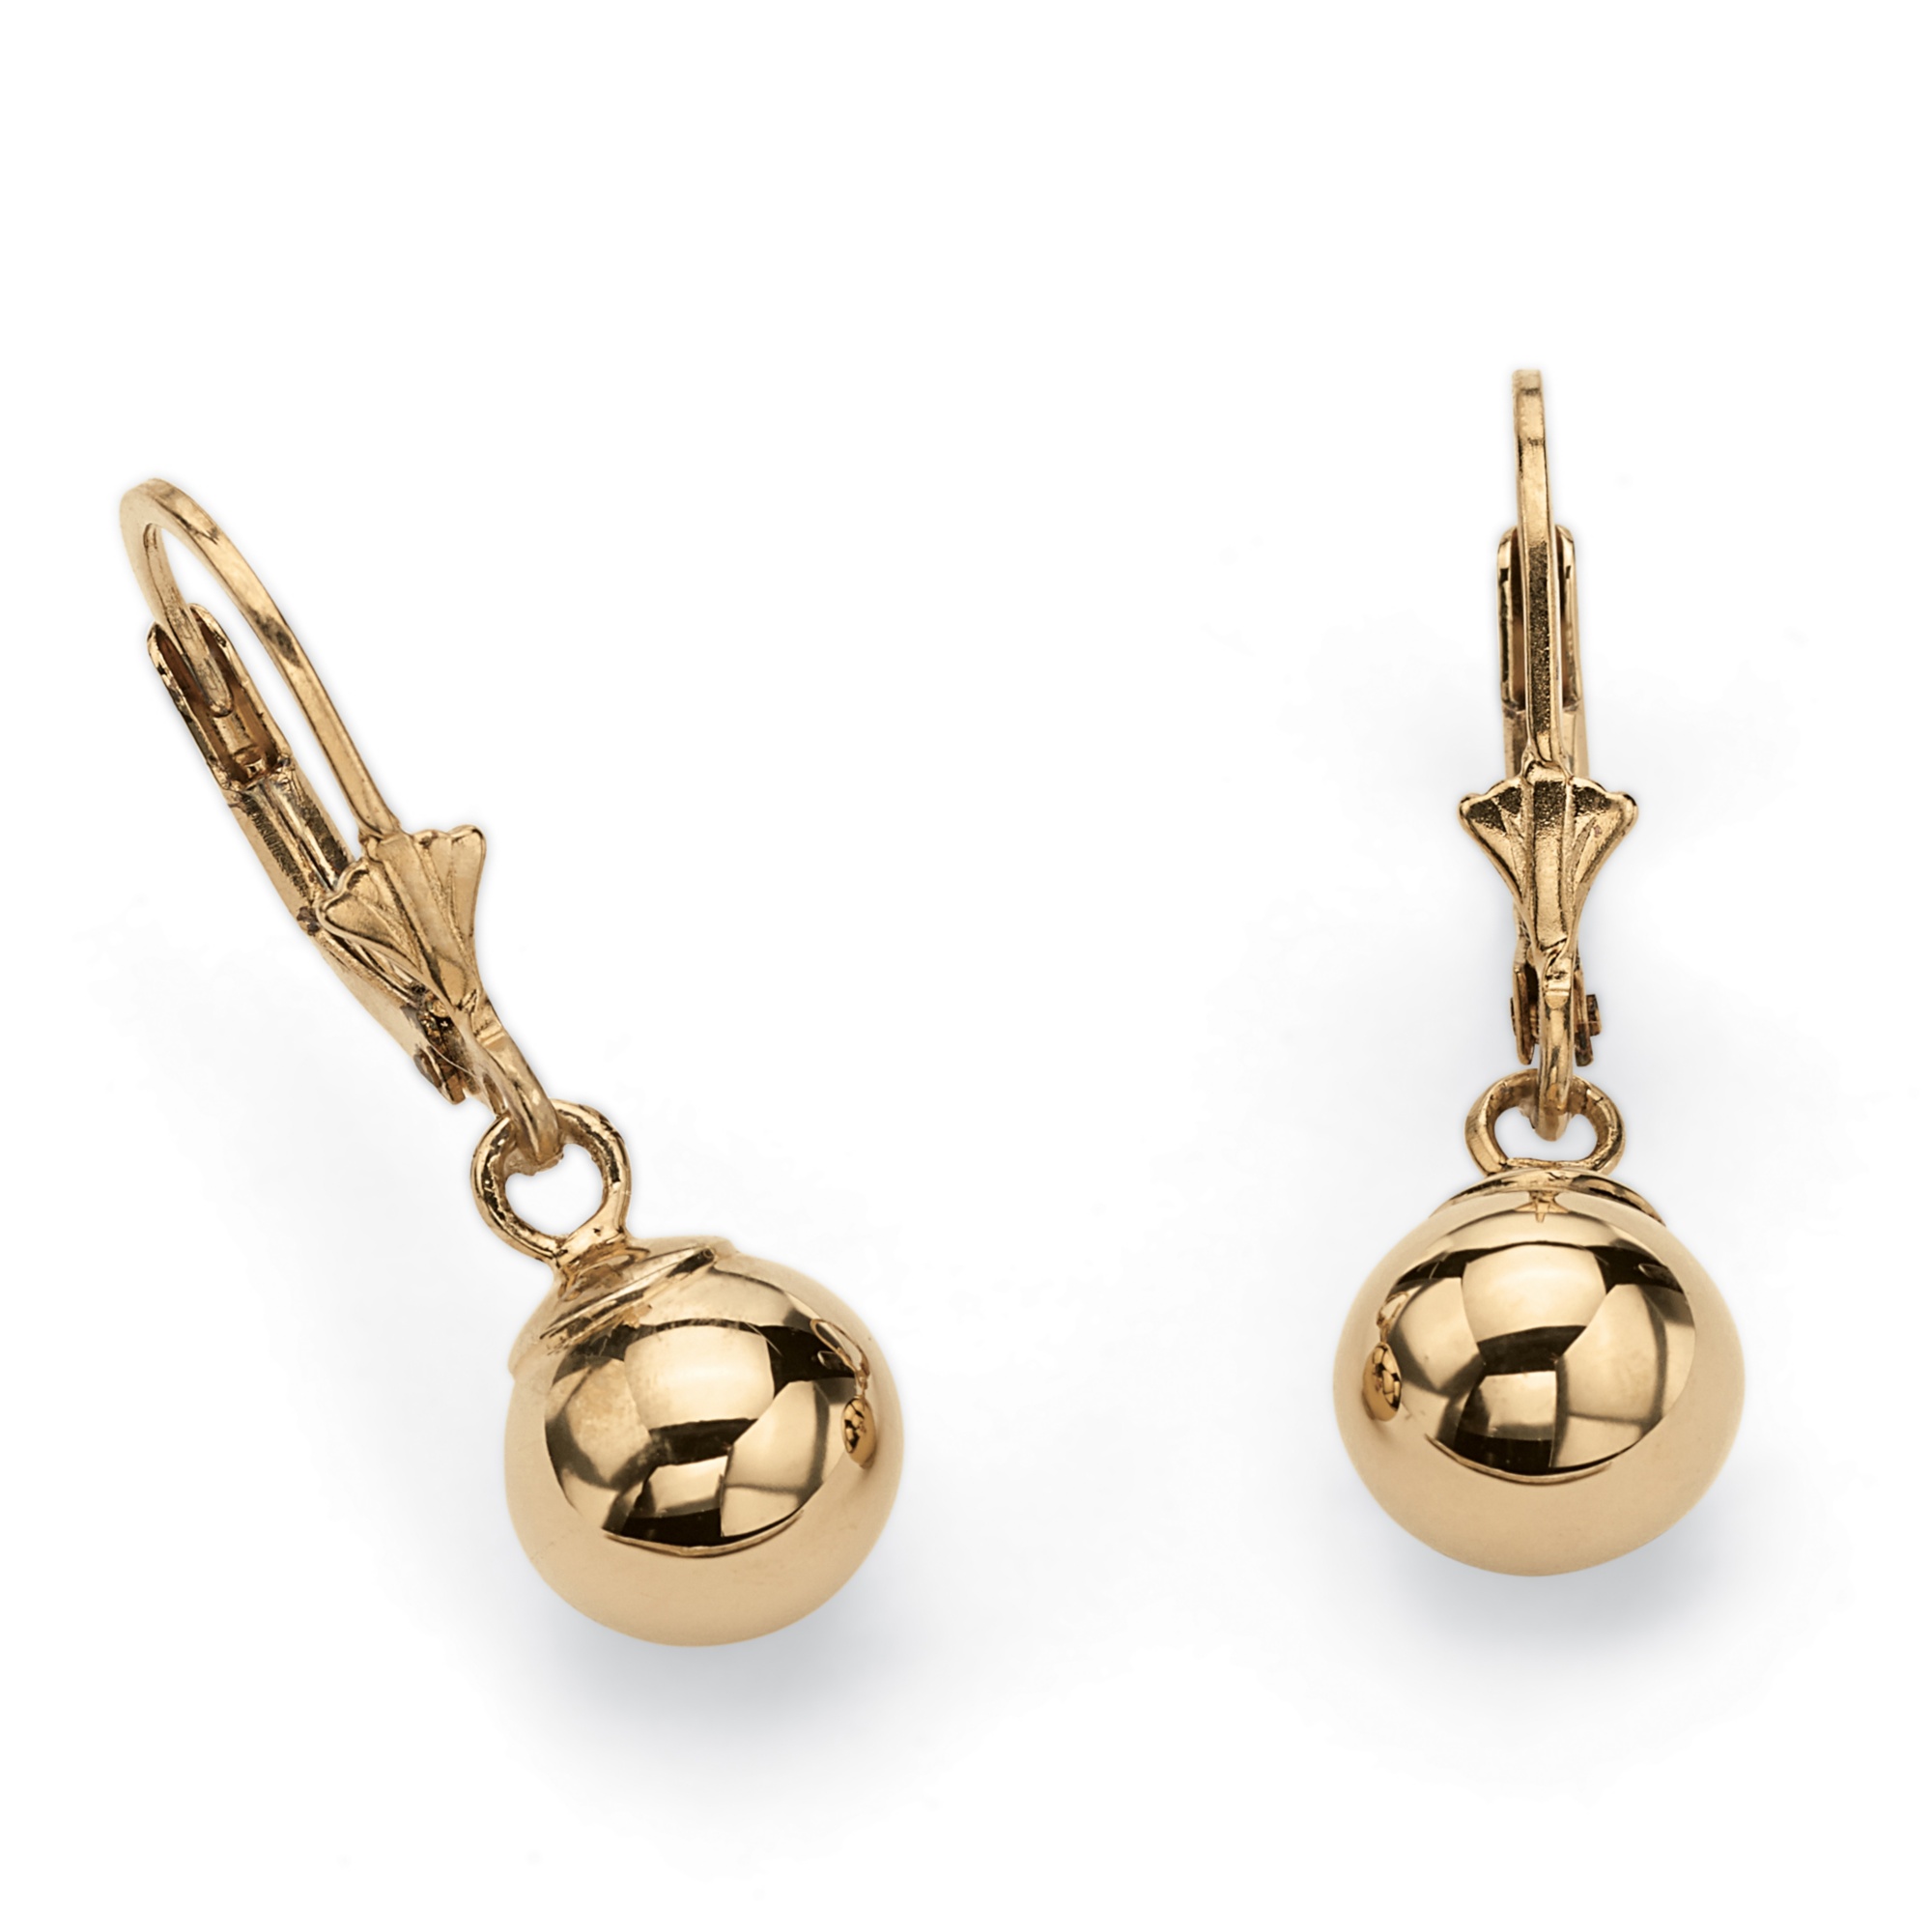 Ball Drop Earrings in 18k Gold over Sterling Silver at PalmBeach Jewelry